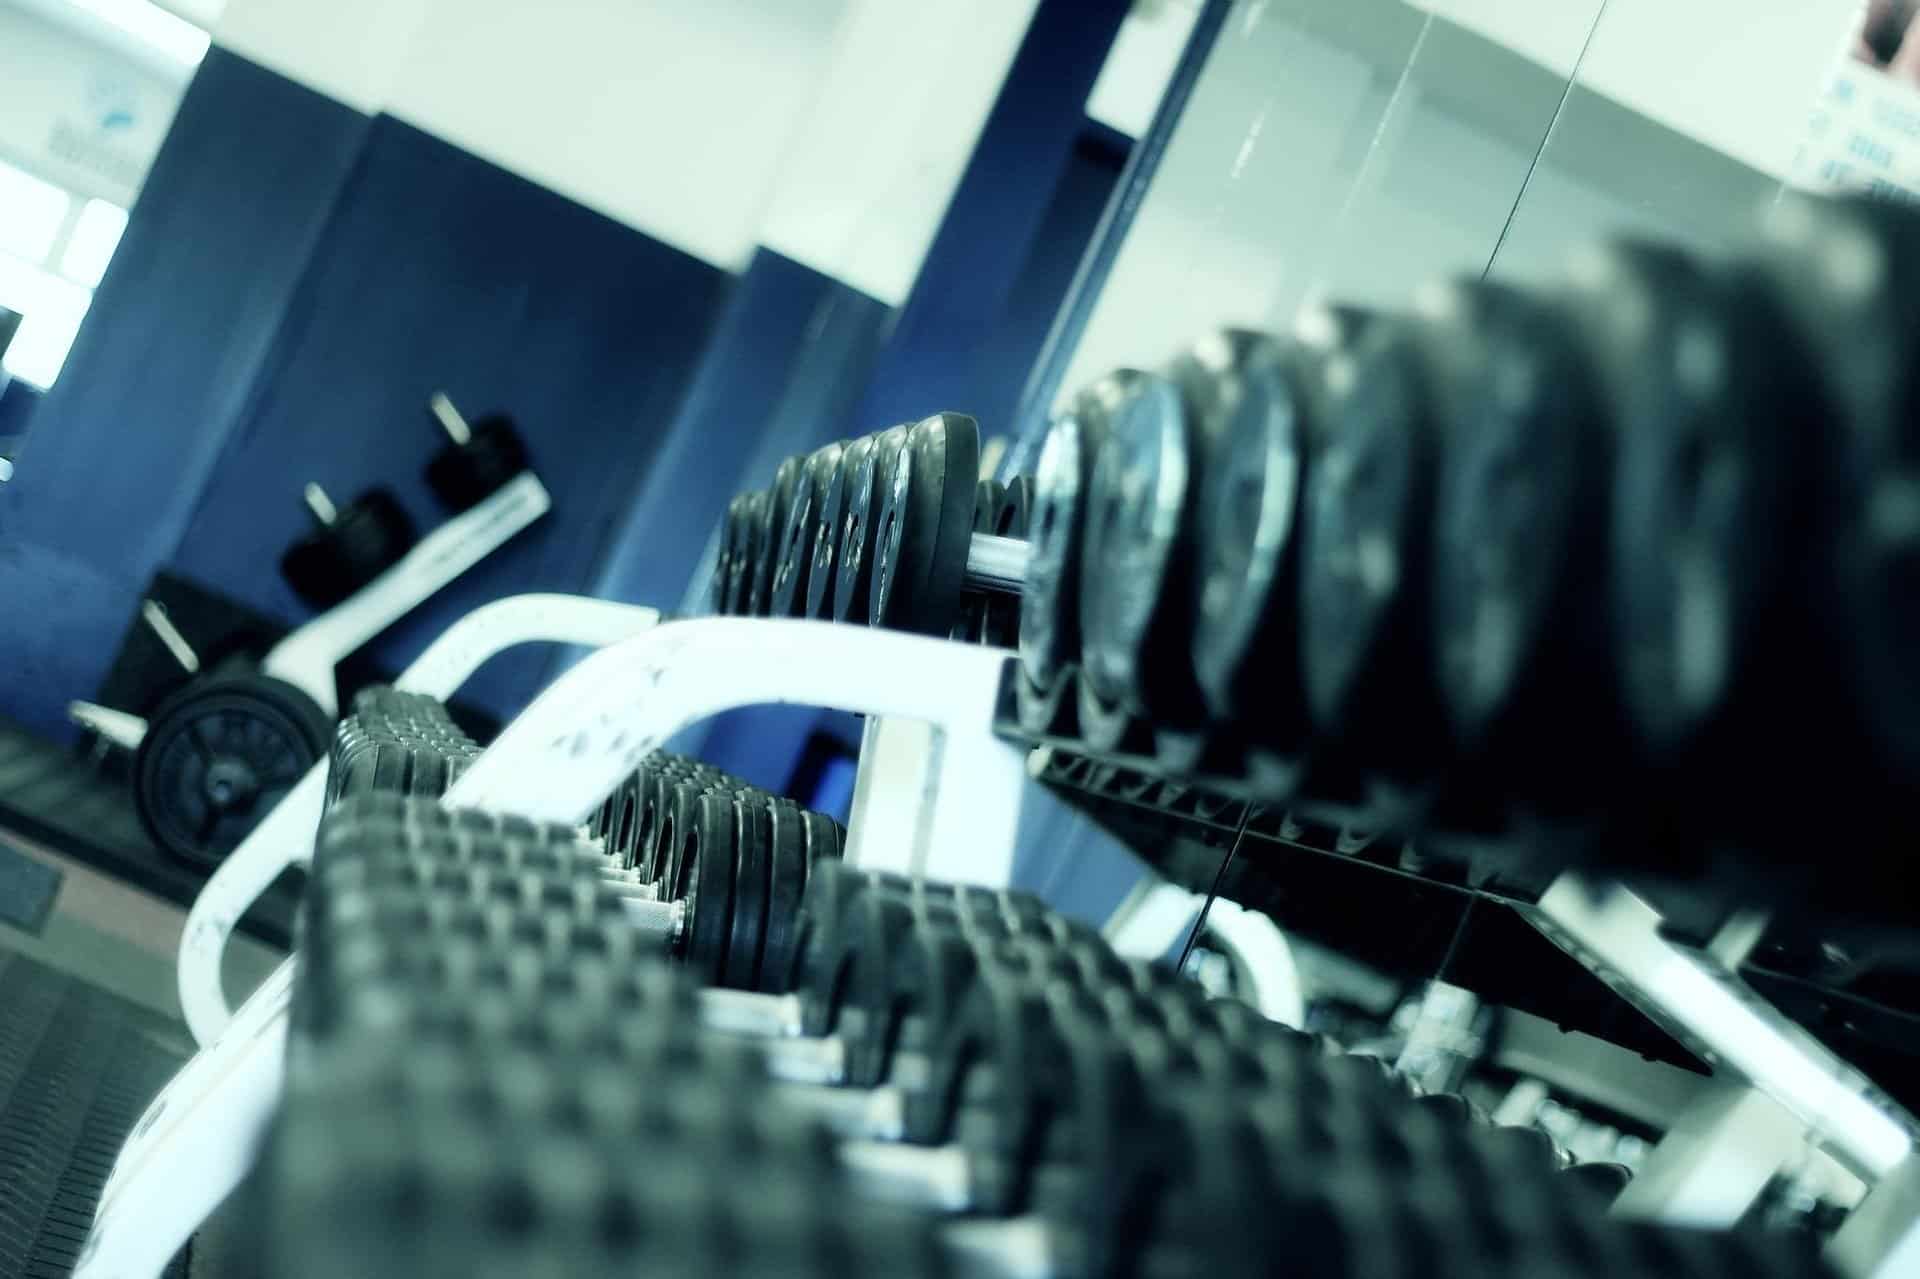 Many Canadians do not plan on returning to the gym even when able